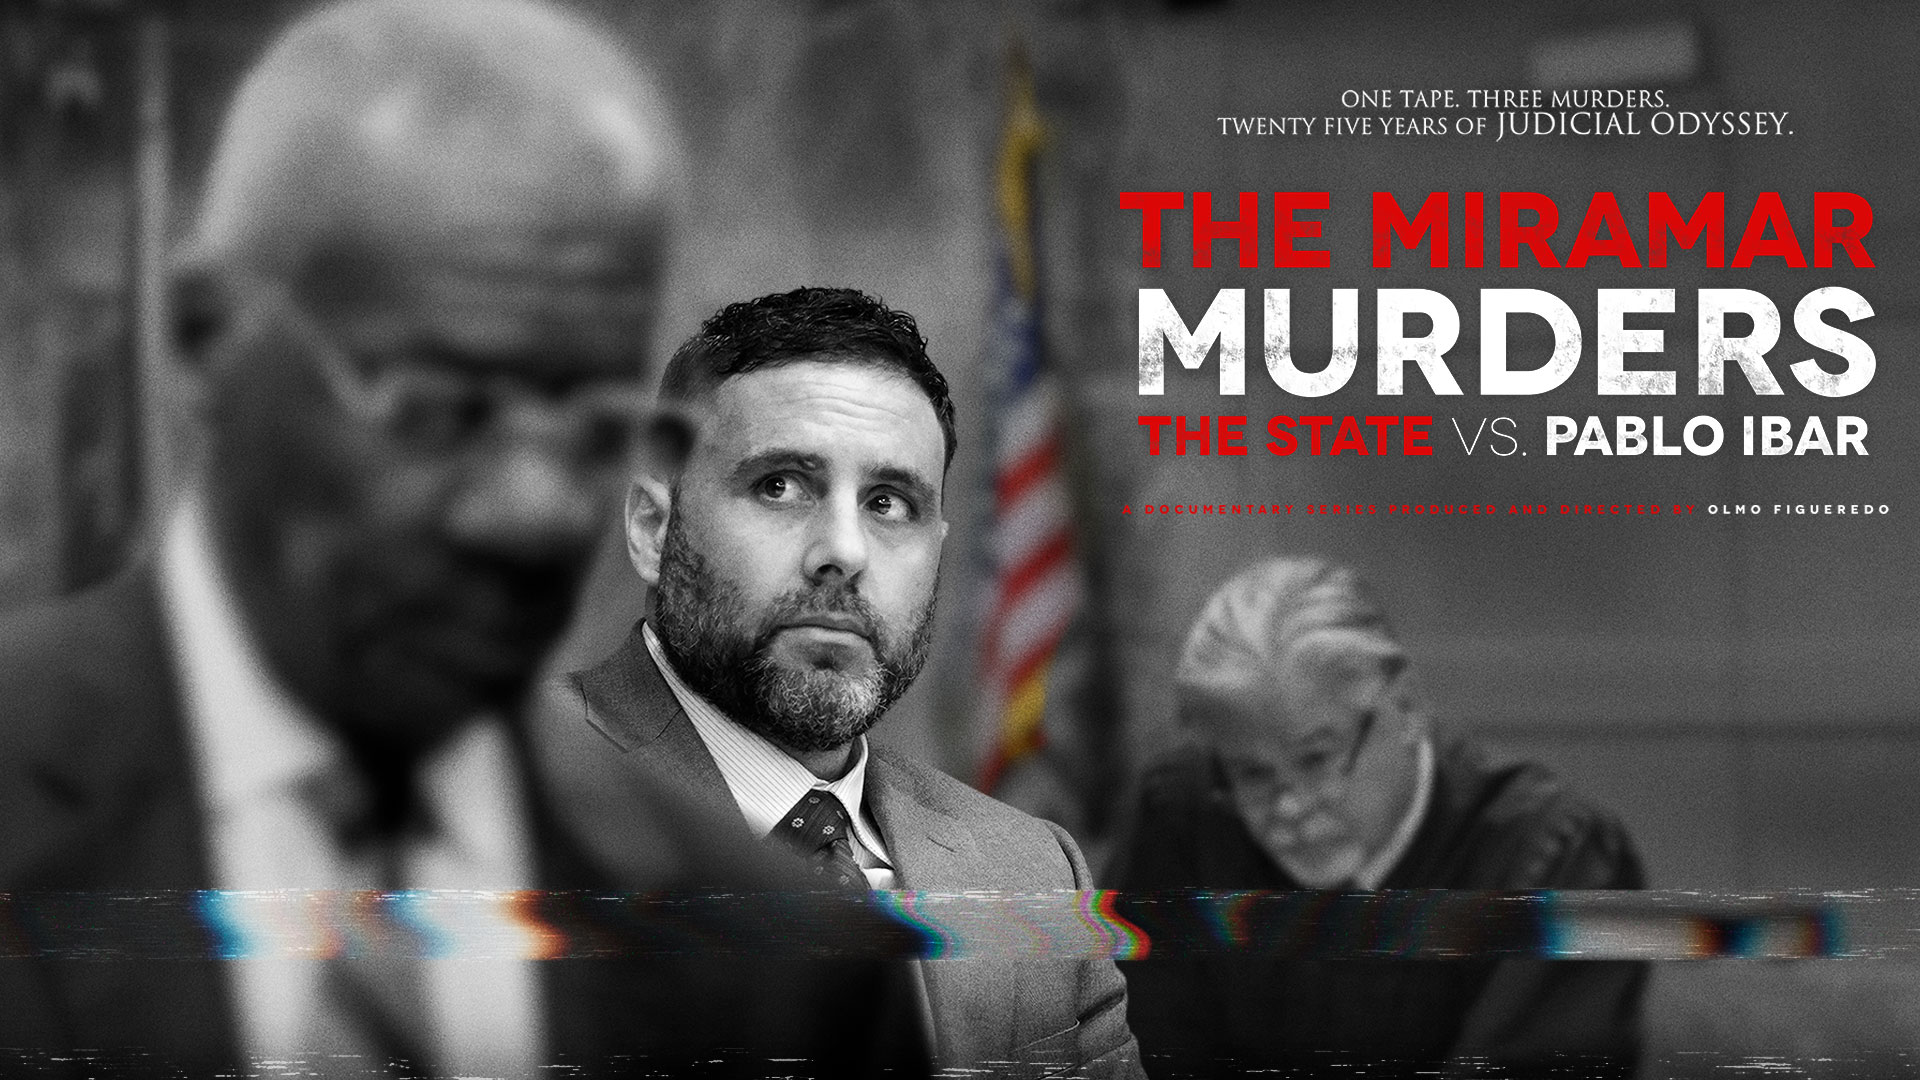 FilmRise Acquires Exclusive Distribution Rights to Chilling Docu-Series, “The Miramar Murders: The State Vs. Pablo Ibar”